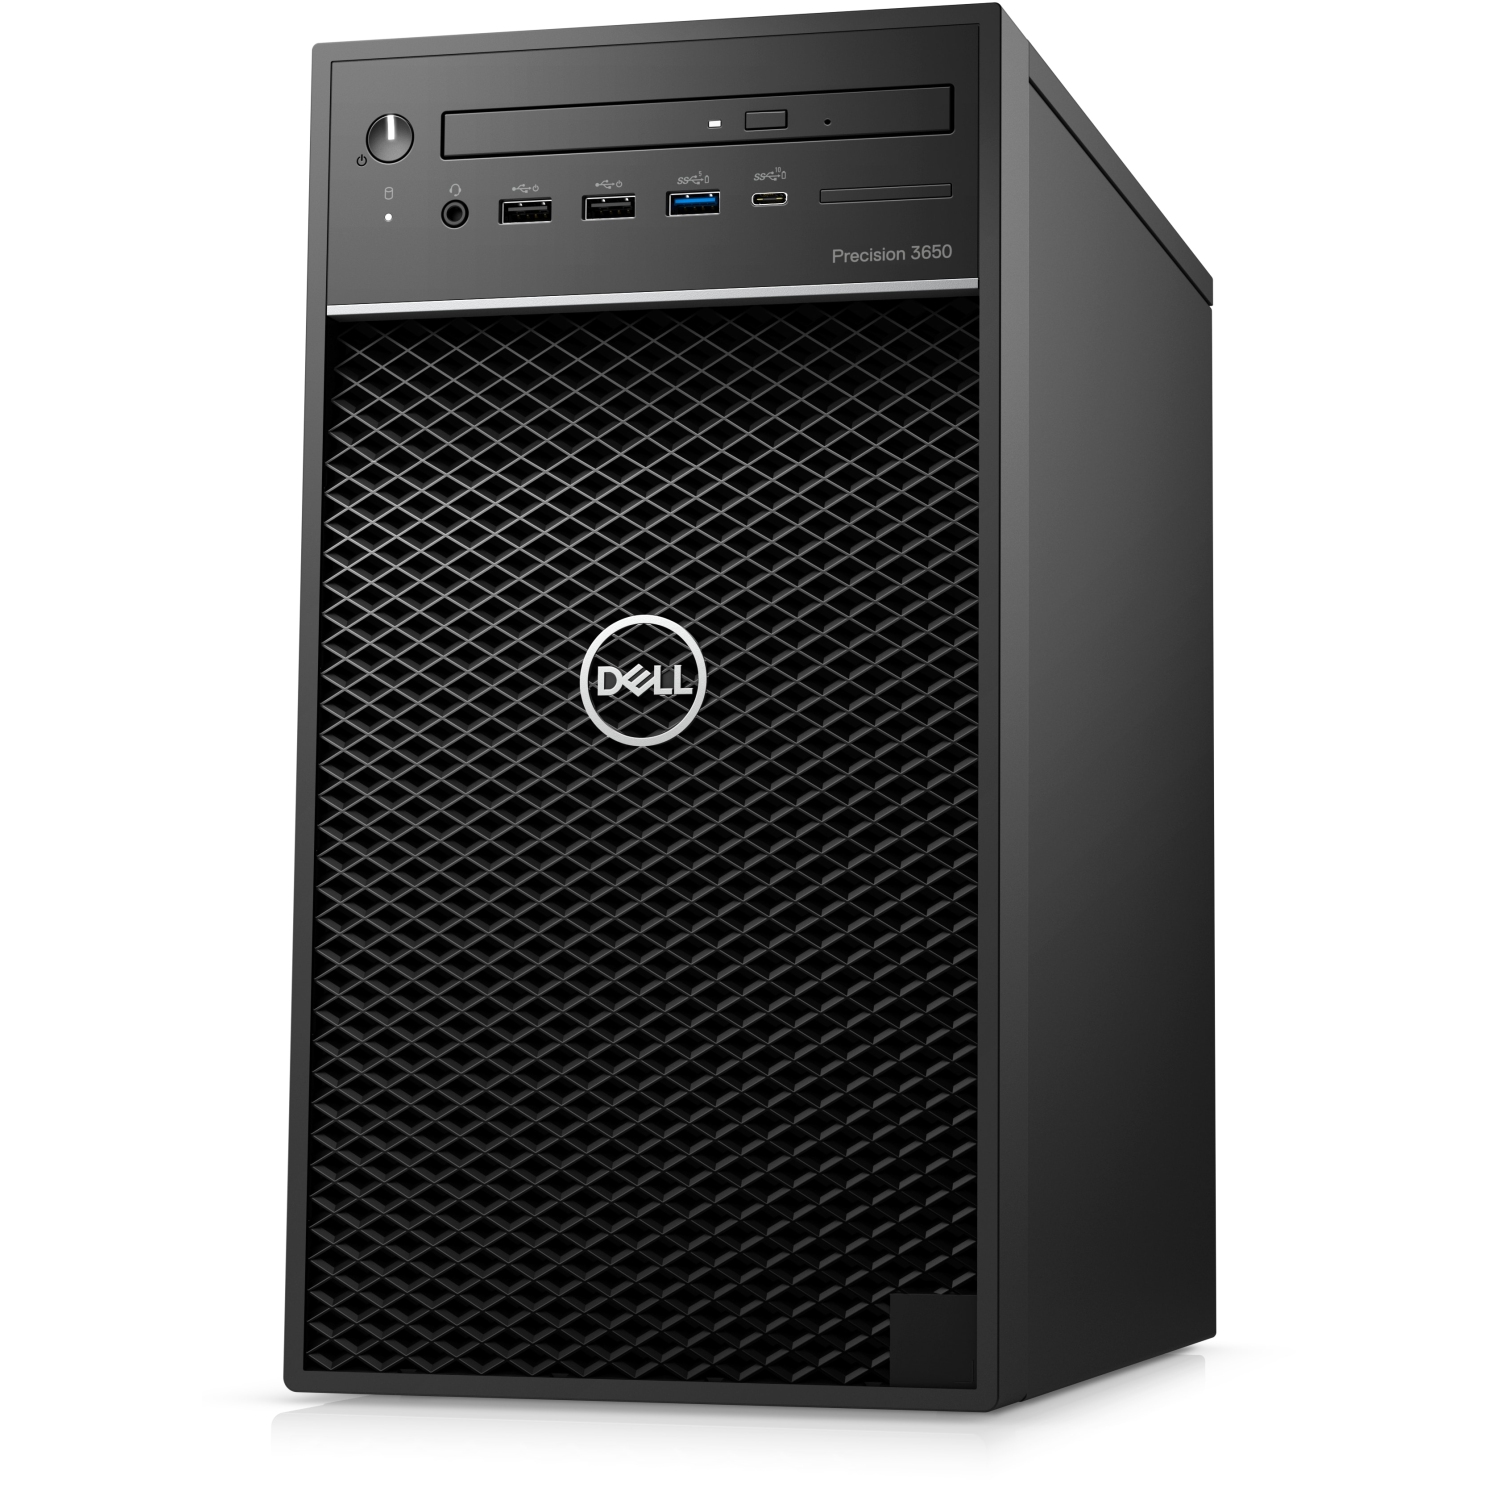 Refurbished (Excellent) - Dell Precision T3650 Workstation Desktop (2021), Core i9, 256GB SSD, 32GB RAM, RTX 3080, 8 Cores @ 4.9 GHz, 11th Gen CPU Certified Refurbished